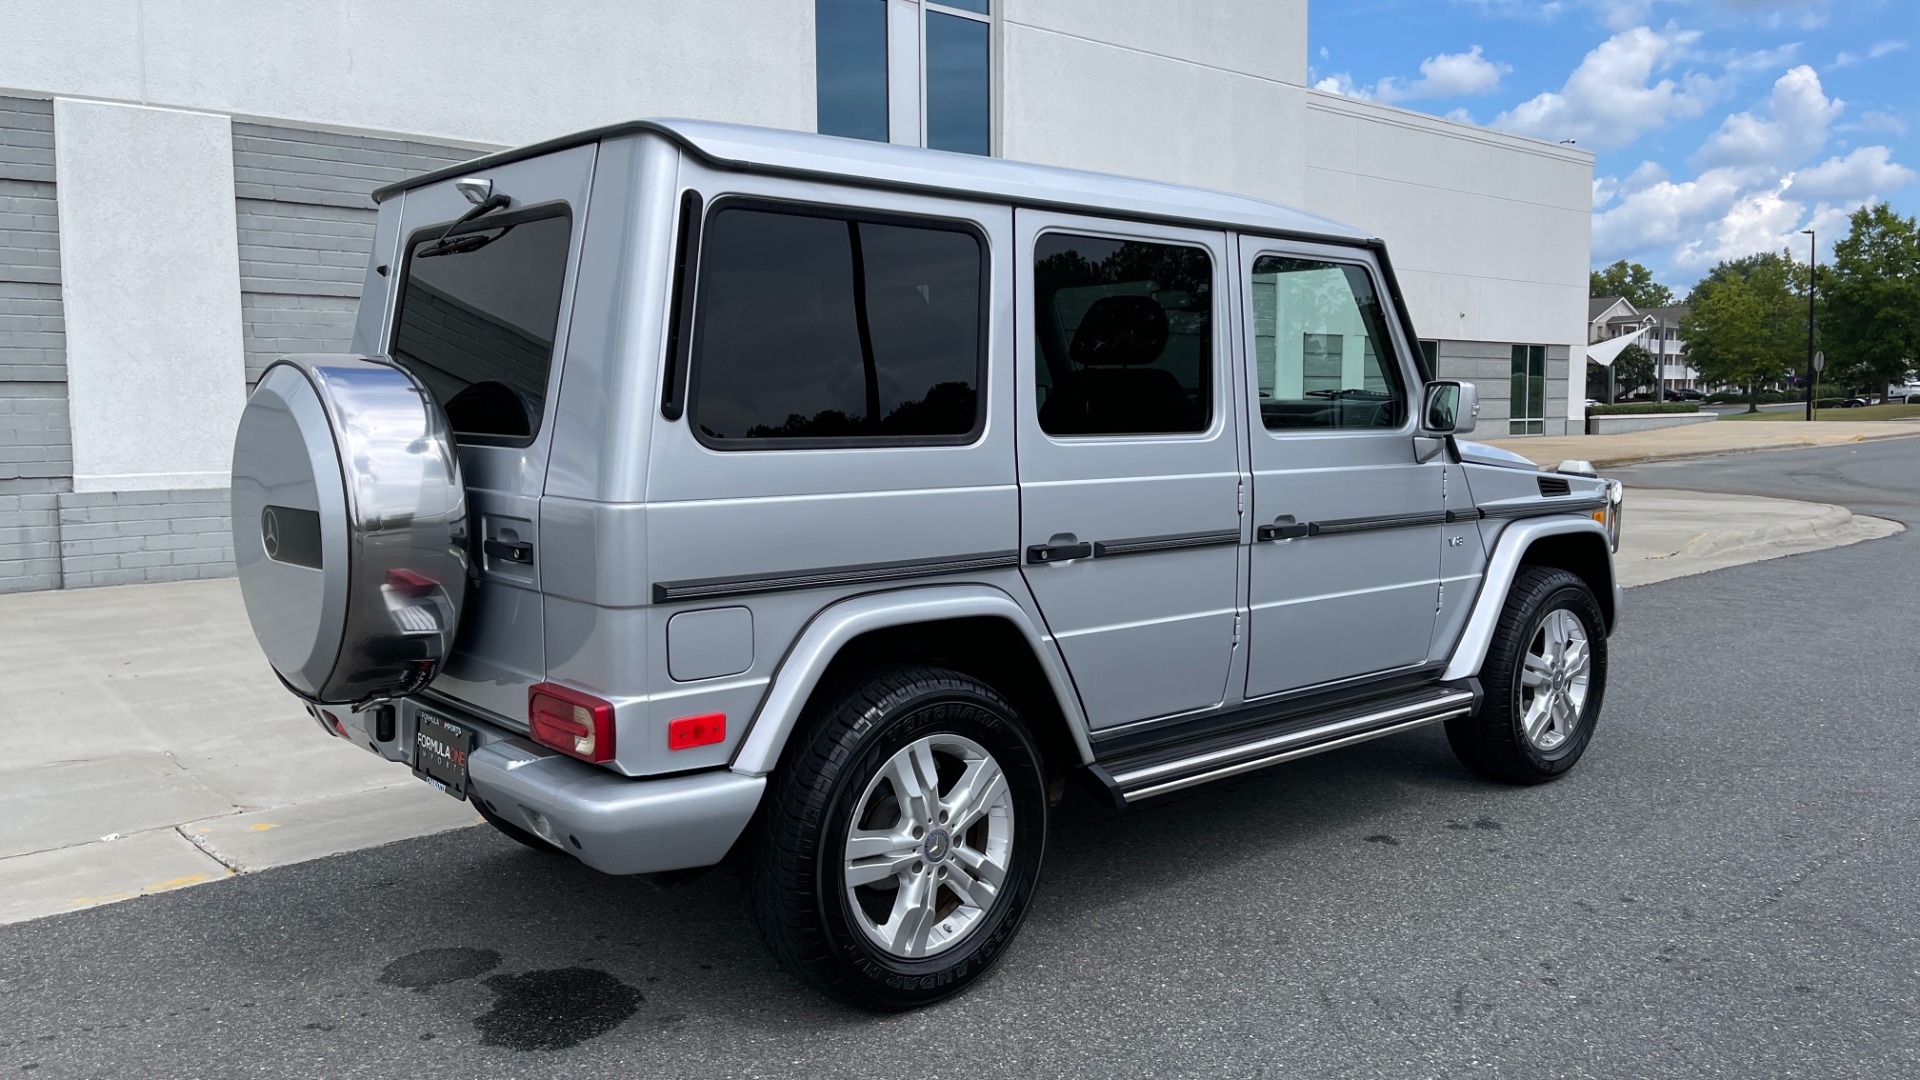 Used 2009 Mercedes-Benz G-Class 5.5L / G550 / NAV / REARVIEW / COOLED SEATS / HEATED SEATS / SUNROOF for sale $52,995 at Formula Imports in Charlotte NC 28227 9